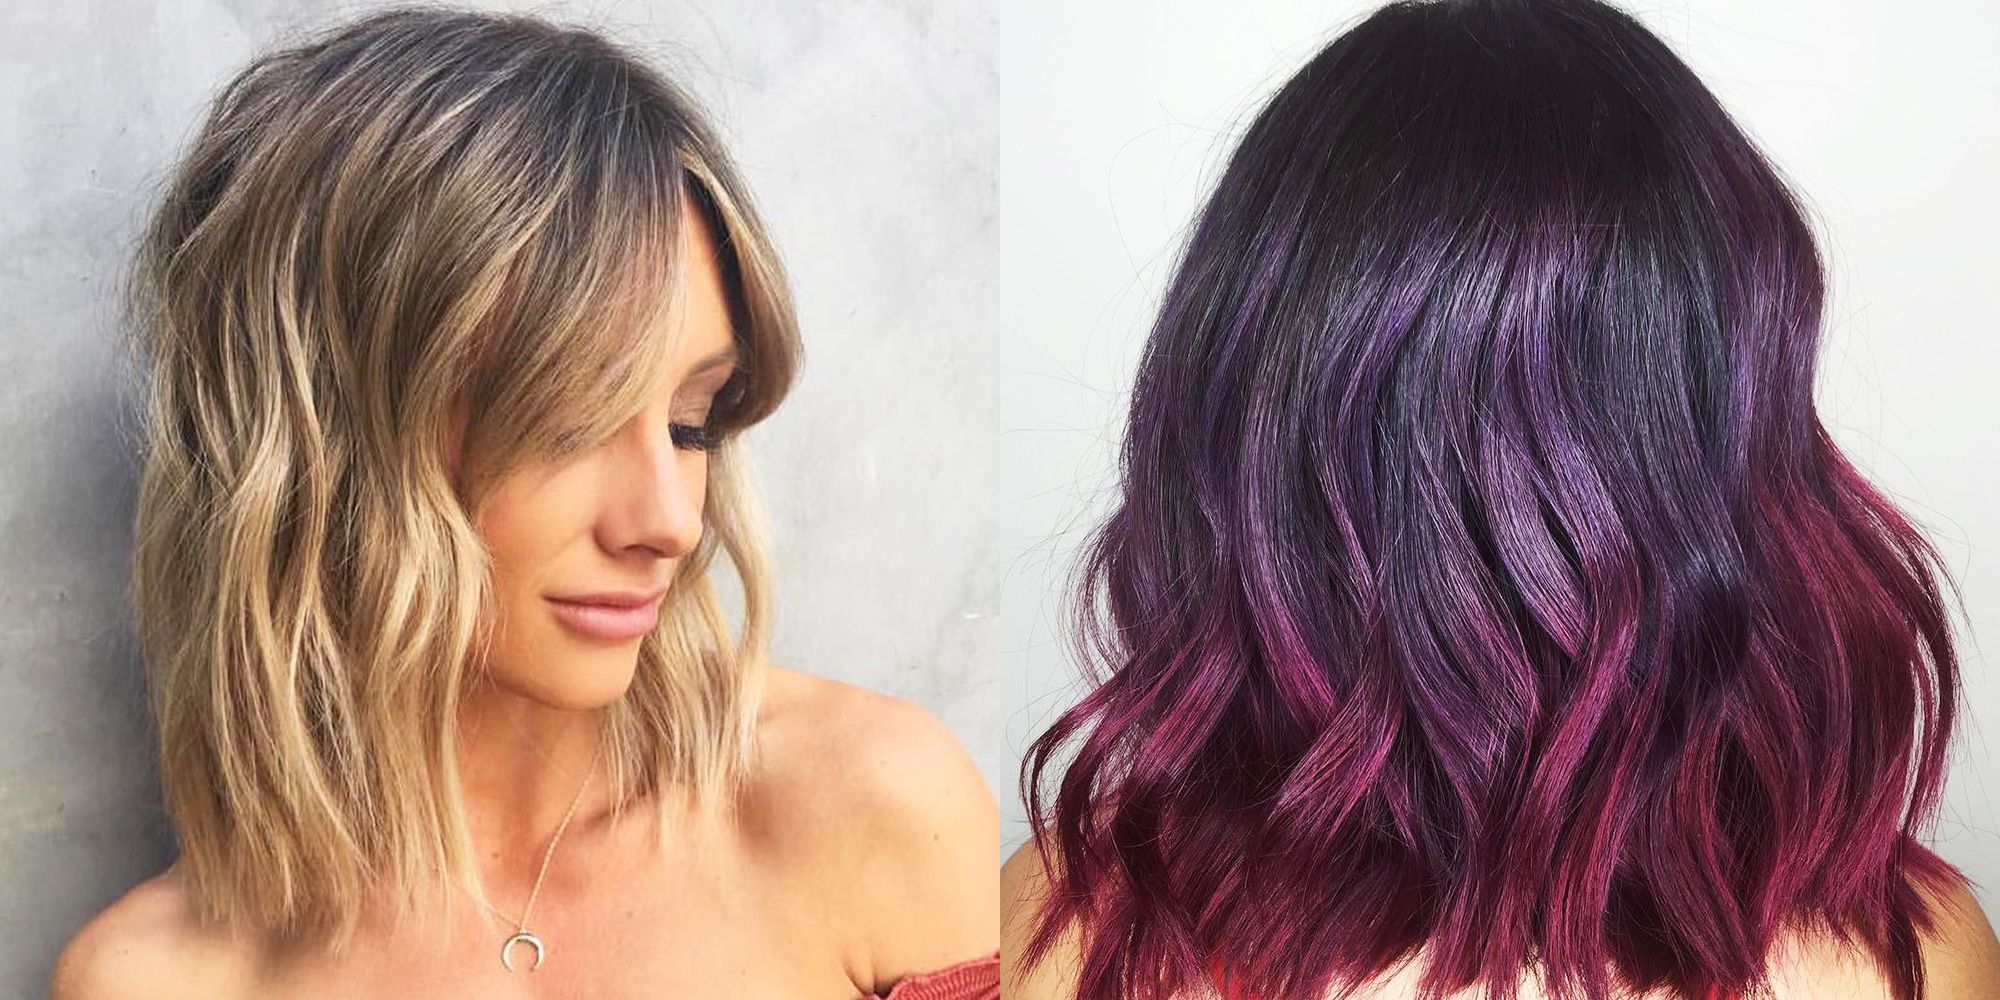 Details more than 157 hairstyles for dip dyed hair